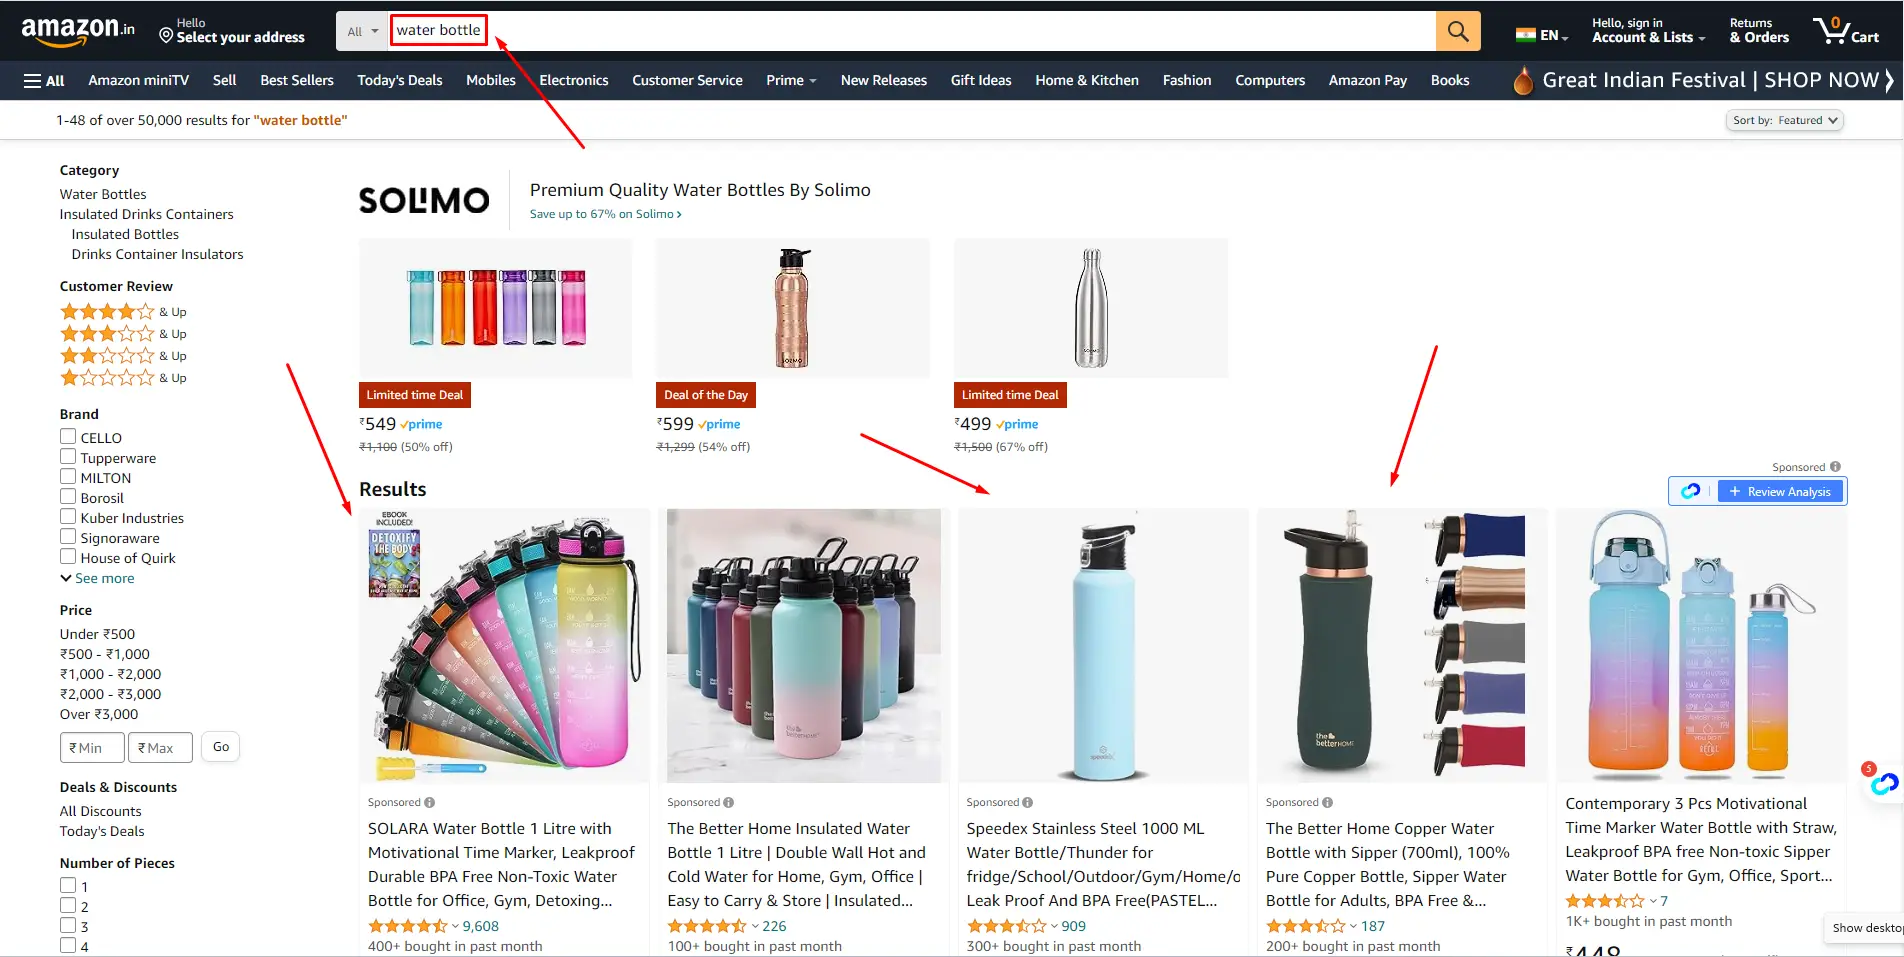 Search-results-of-Water-Bottle-in-Amazon